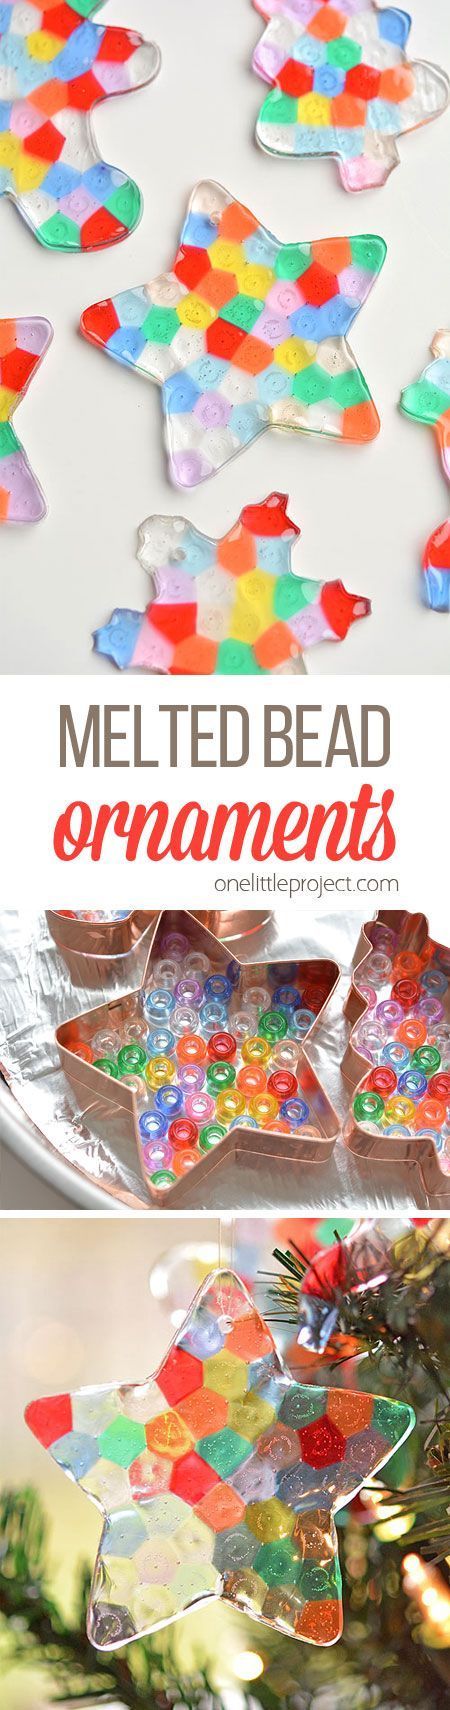 These melted bead ornaments are SO BEAUTIFUL! And theyre so easy to make with pony beads! You can hang them on the Christmas tree,